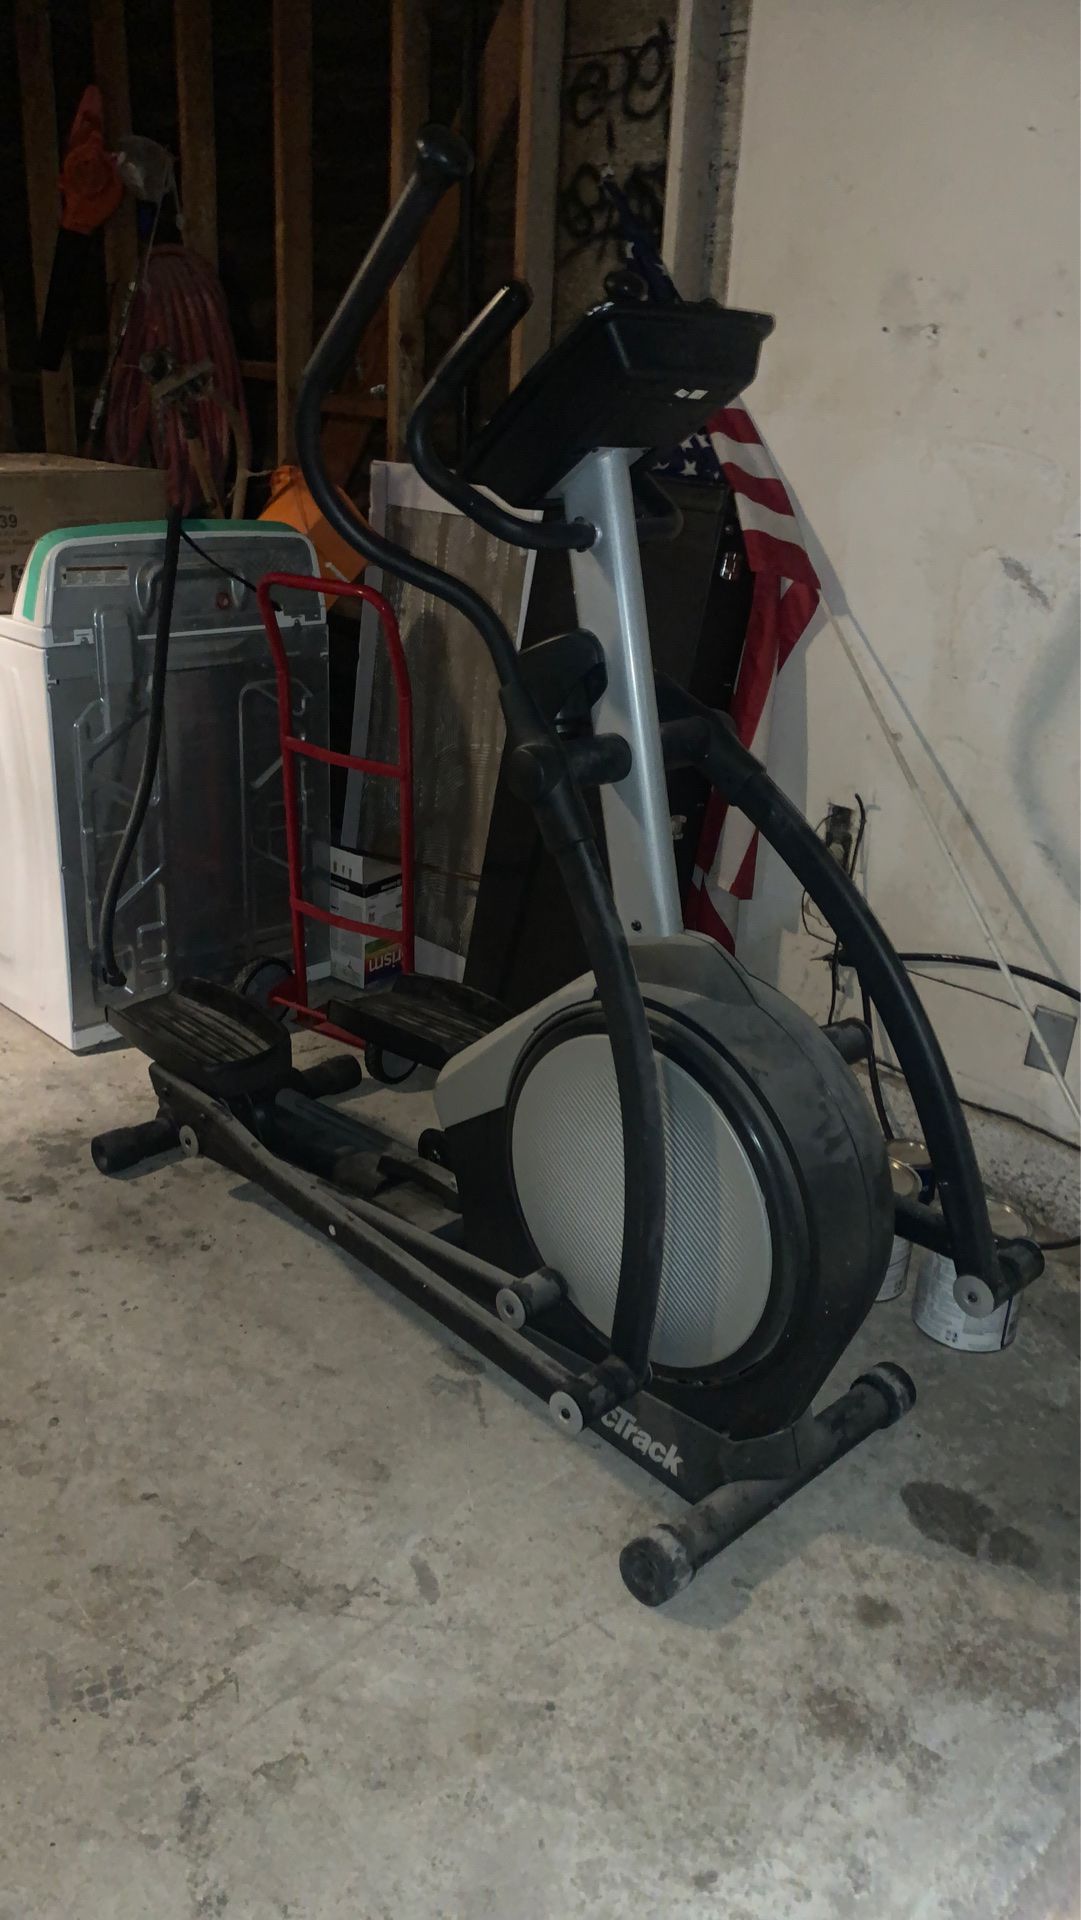 Nordictrack elliptical . Trade for weight bench and weights. FREE ab lounge with purchase of Elliptical